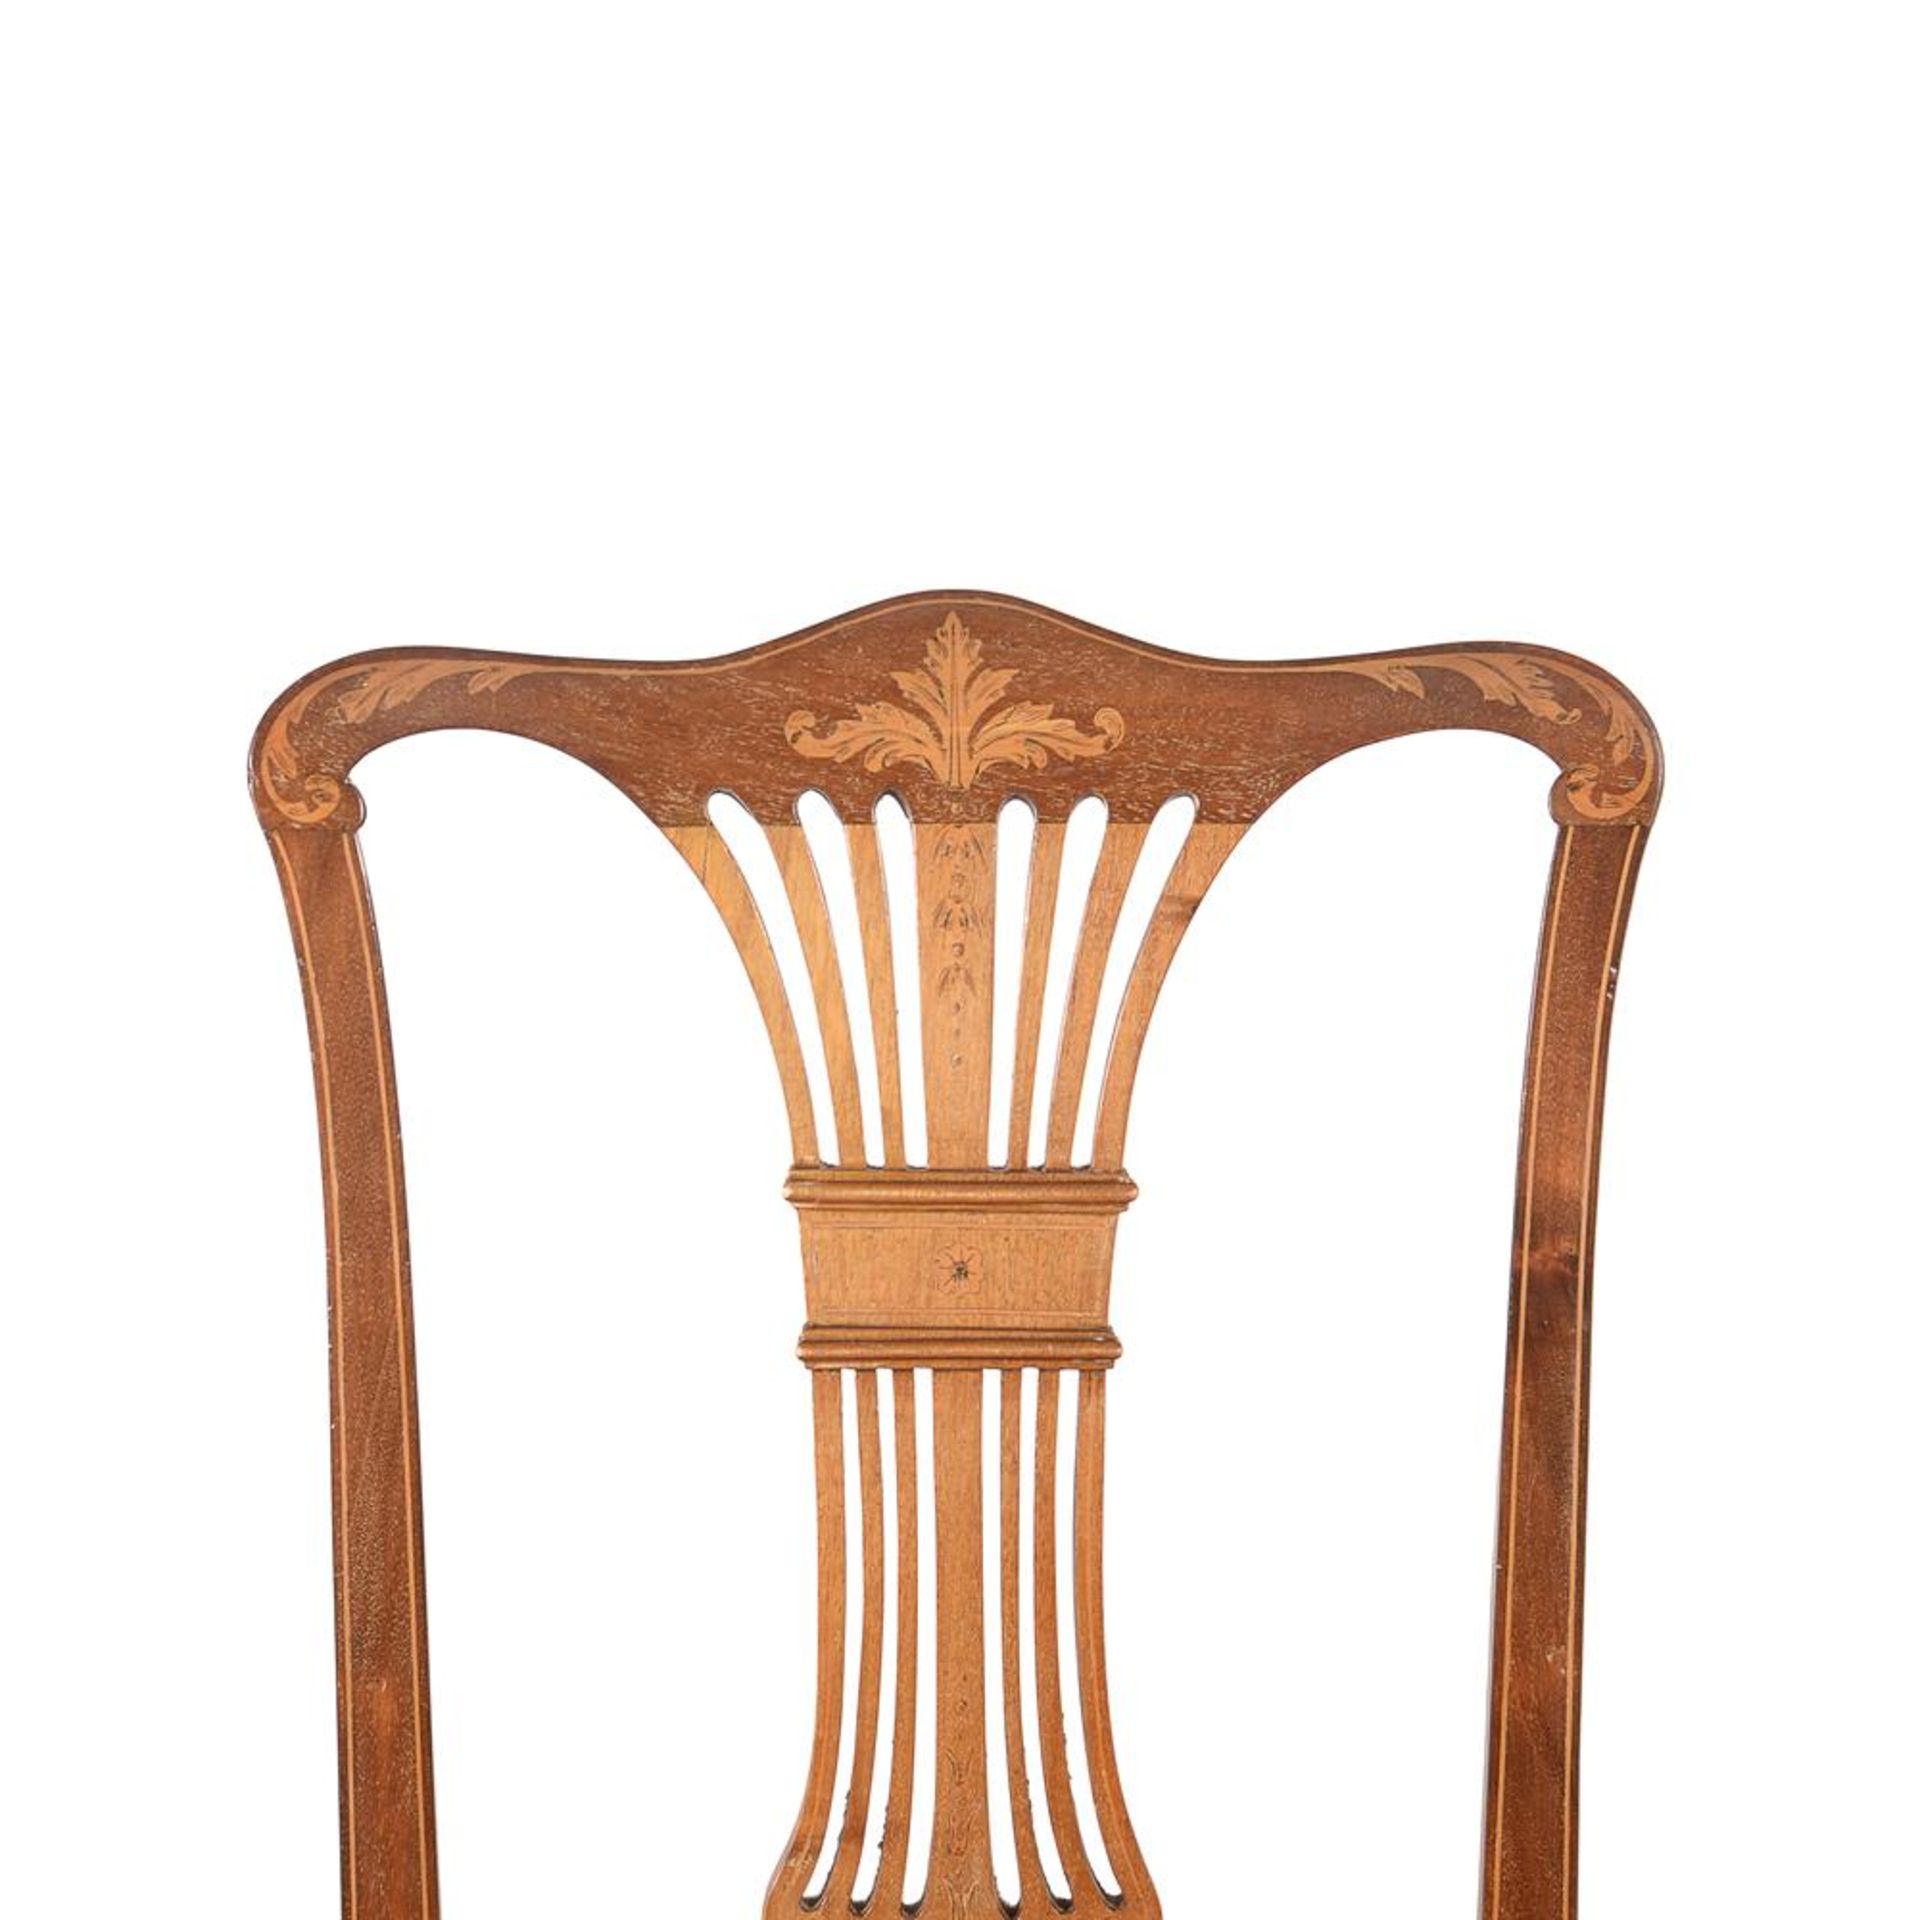 A SET OF FOUR EDWARDIAN MAHOGANY AND INLAID CHAIRS - Image 3 of 4